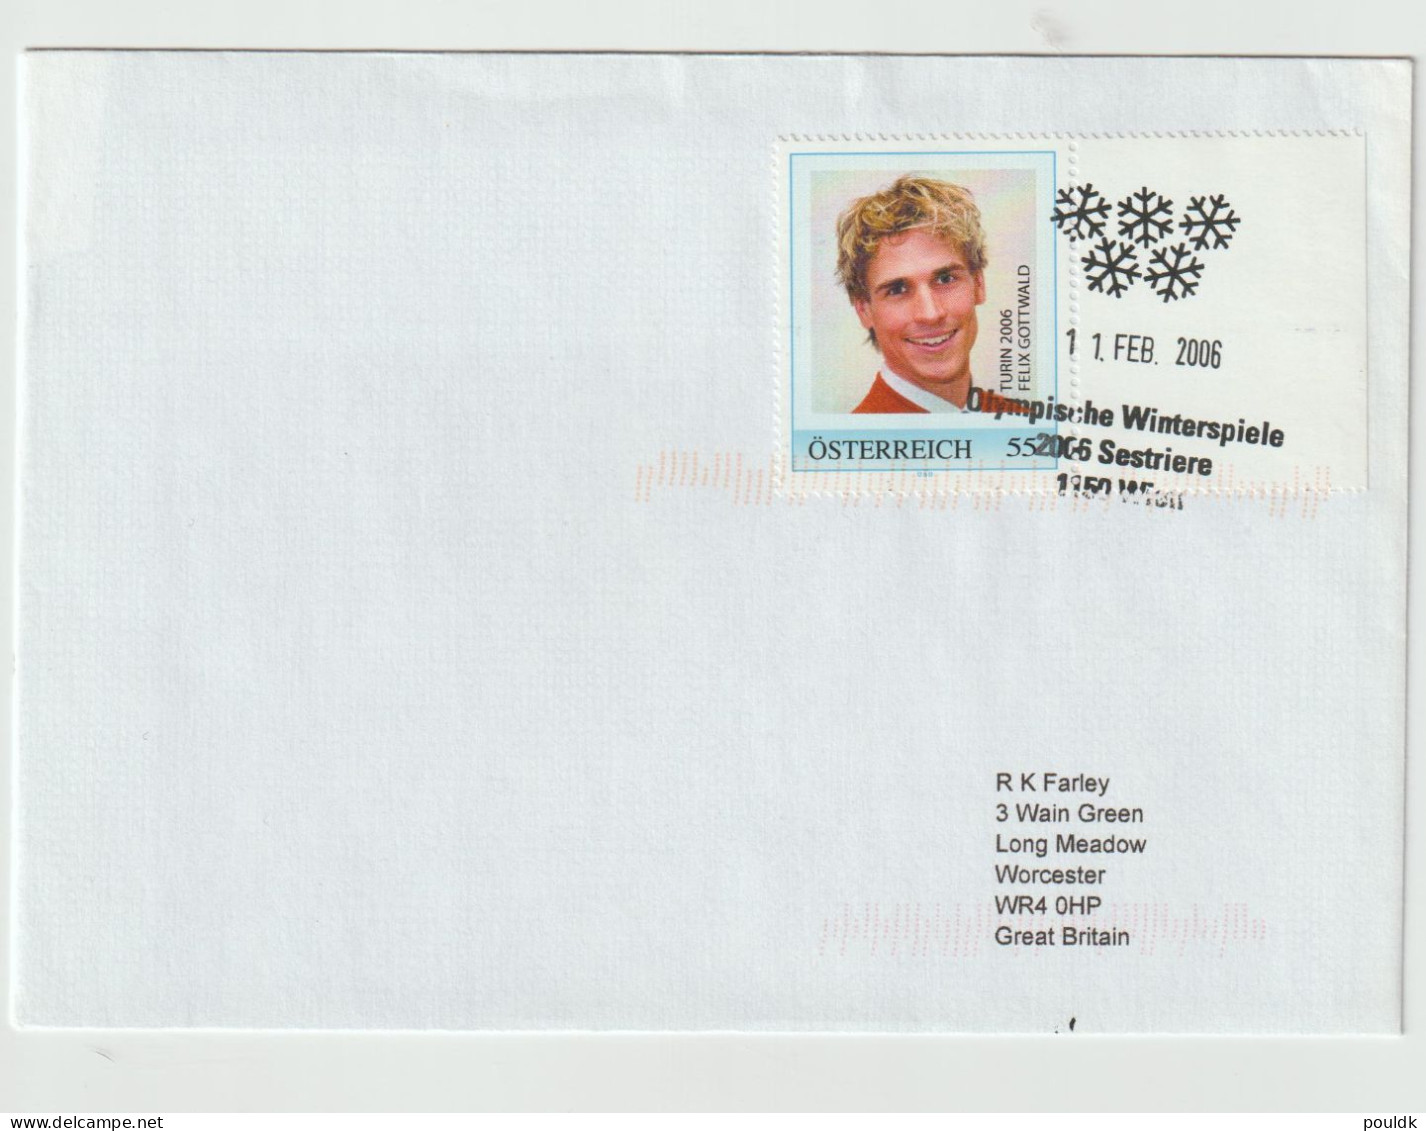 Personalized Stamp From Austria Used On Cover: Felix Gottwald, An Austrian Nordic Combined Athlete With Several Olympic - Invierno 2006: Turín